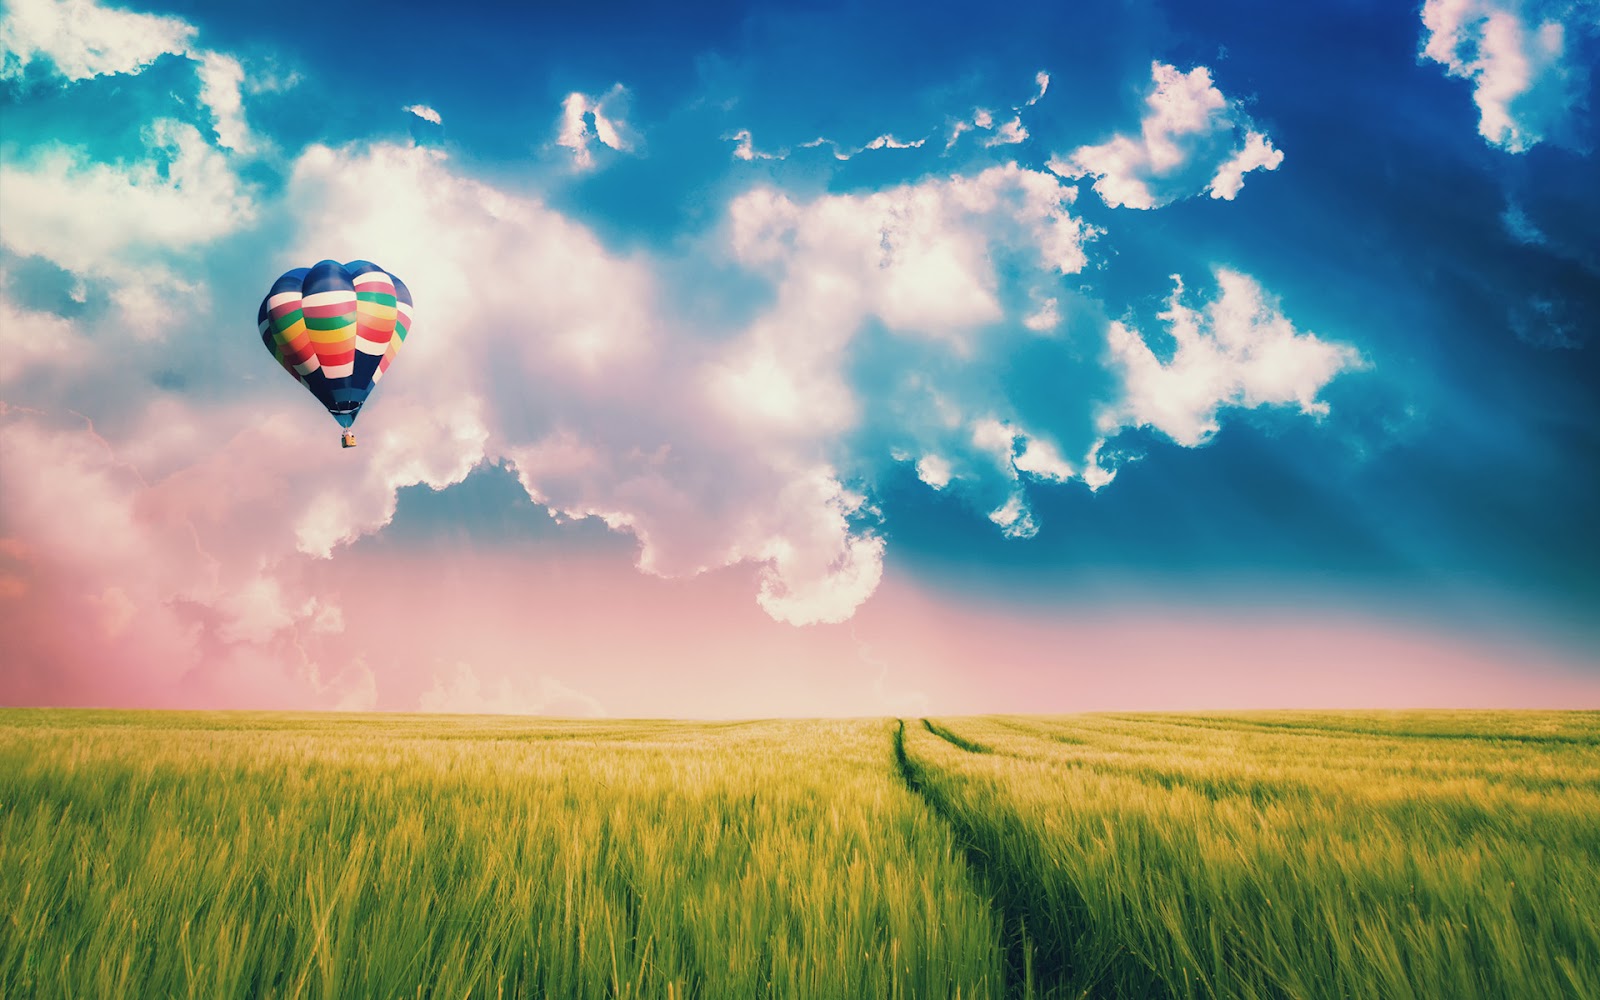 iWallpapers: AIR BALLOON IN THE SKY HD WALLPAPER